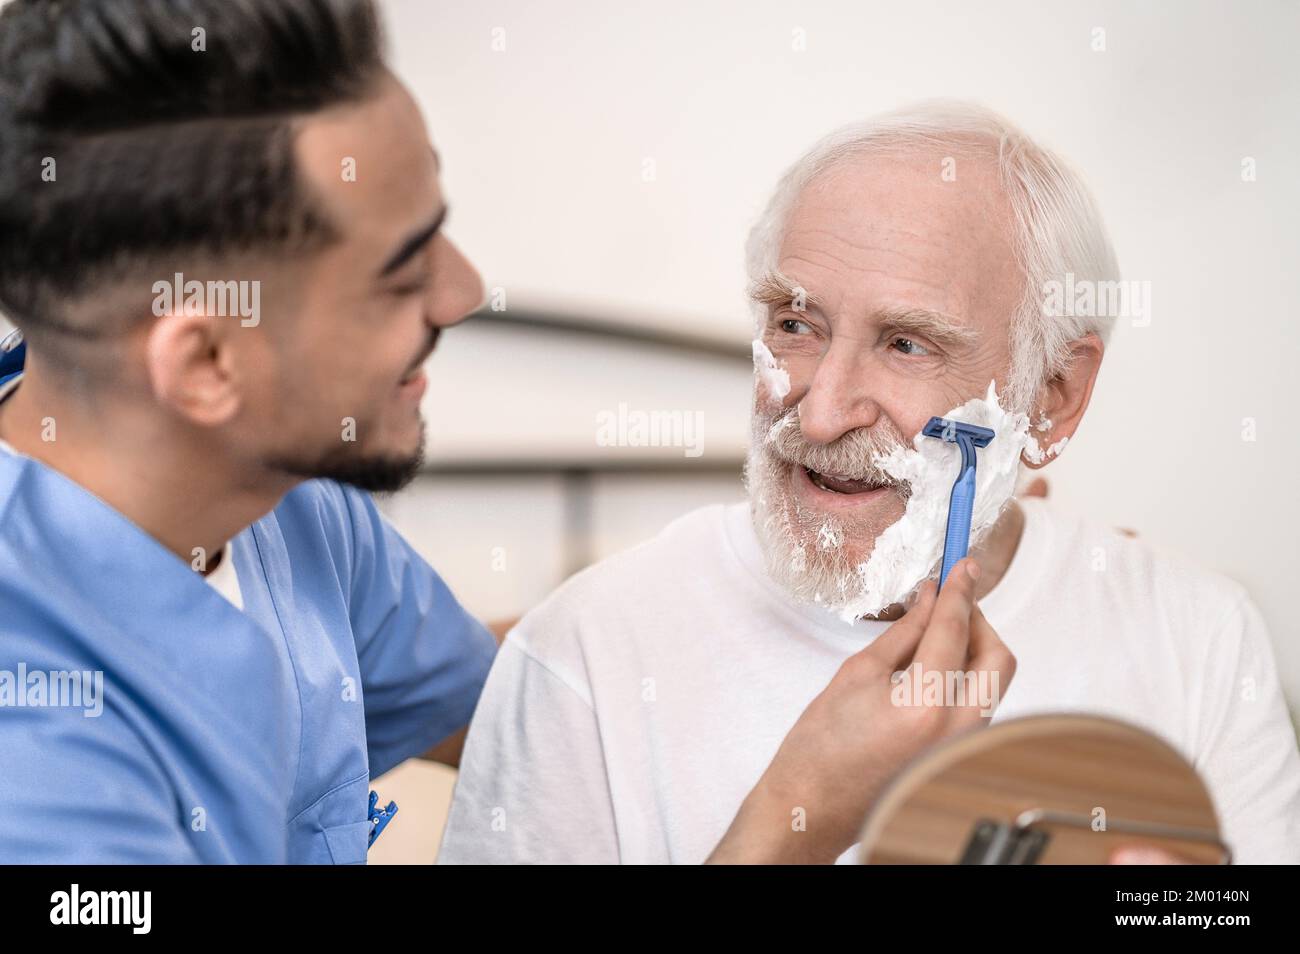 Young caretaker shaving off the stubble on the face of an aged man using a safety razor. Stock Photo